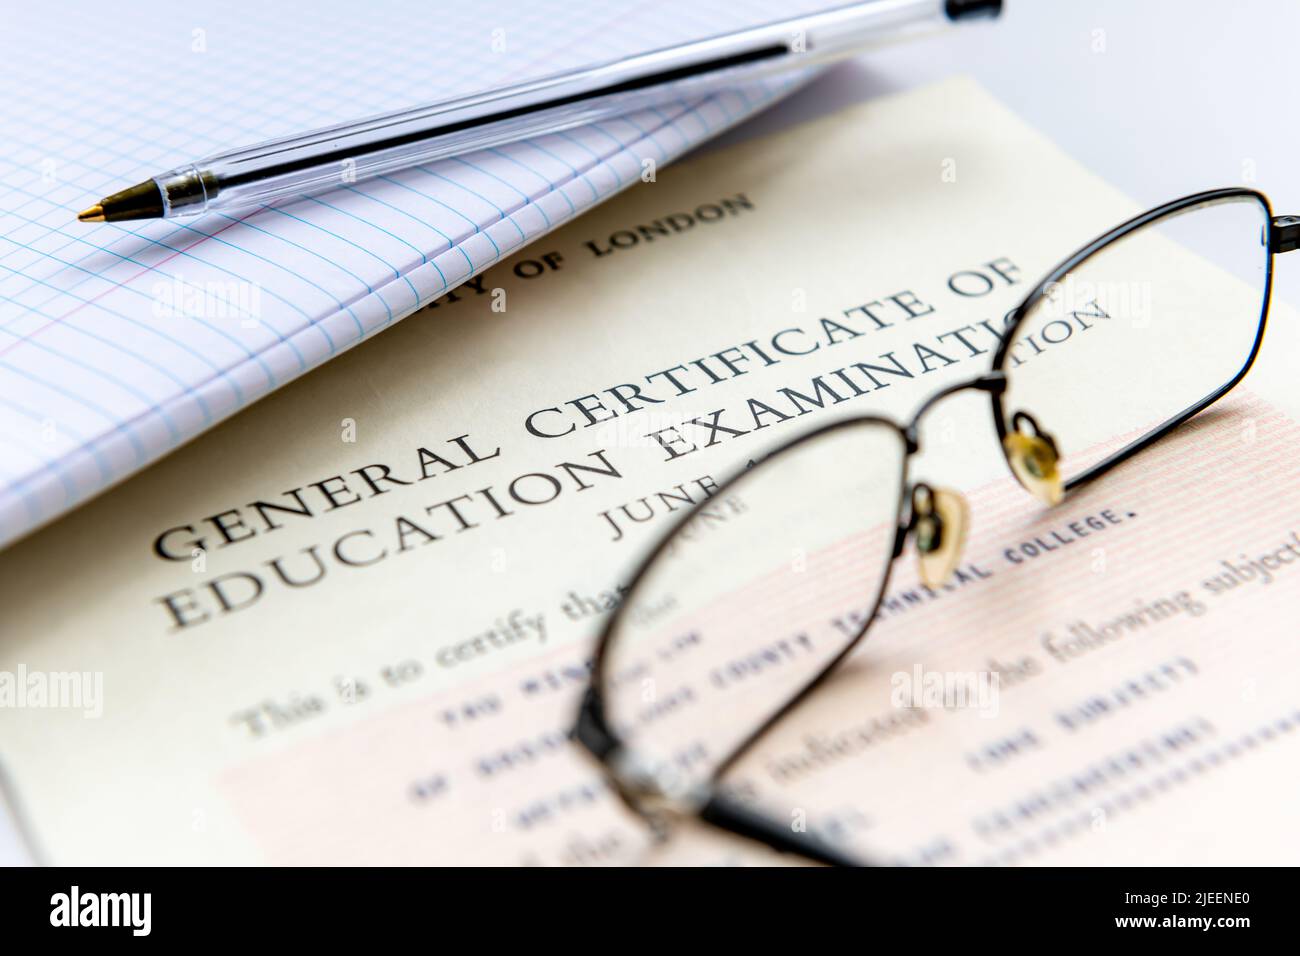 A United Kingdom General Certificate of Education Examination issued for passes of Ordinary and Advance Level studies of Secondary Education. Stock Photo